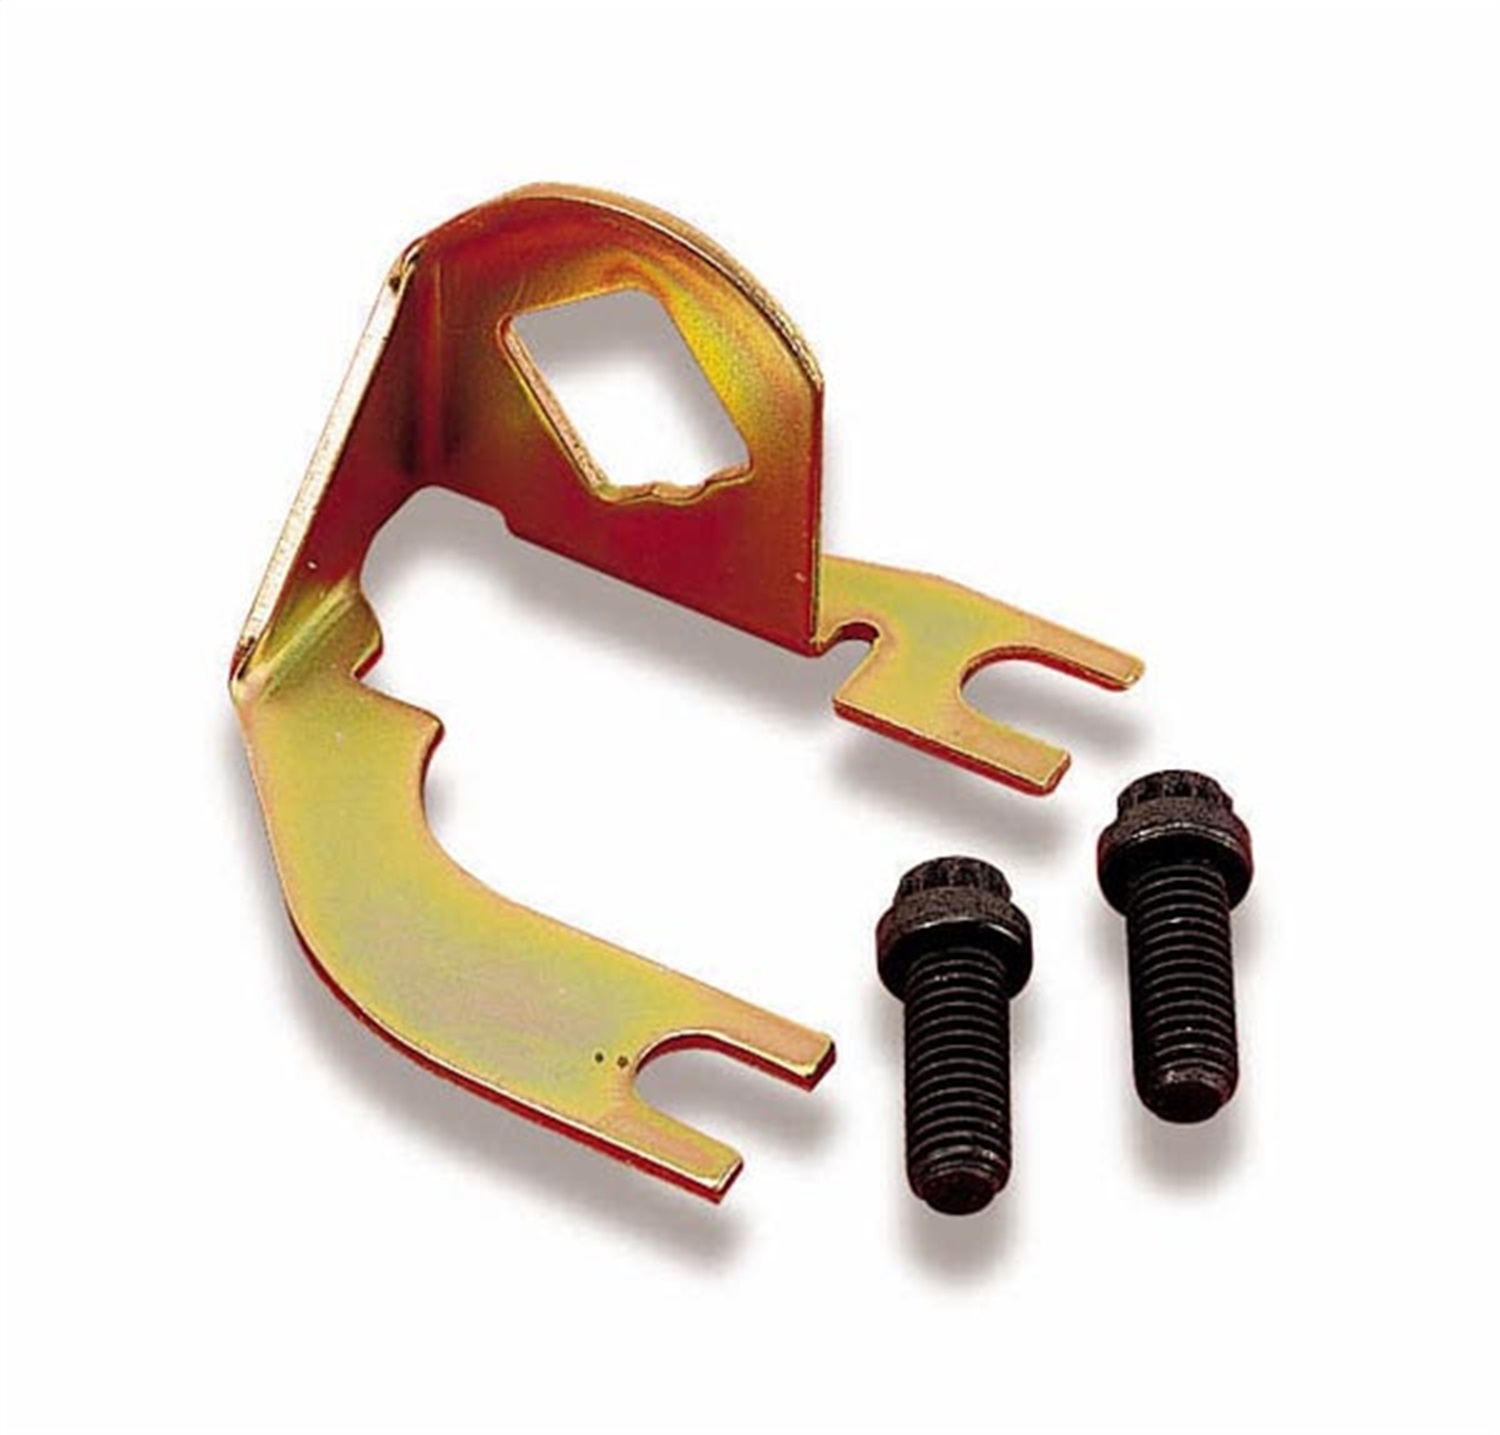 Holley Performance Holley Performance 20-45 Kickdown Cable Bracket